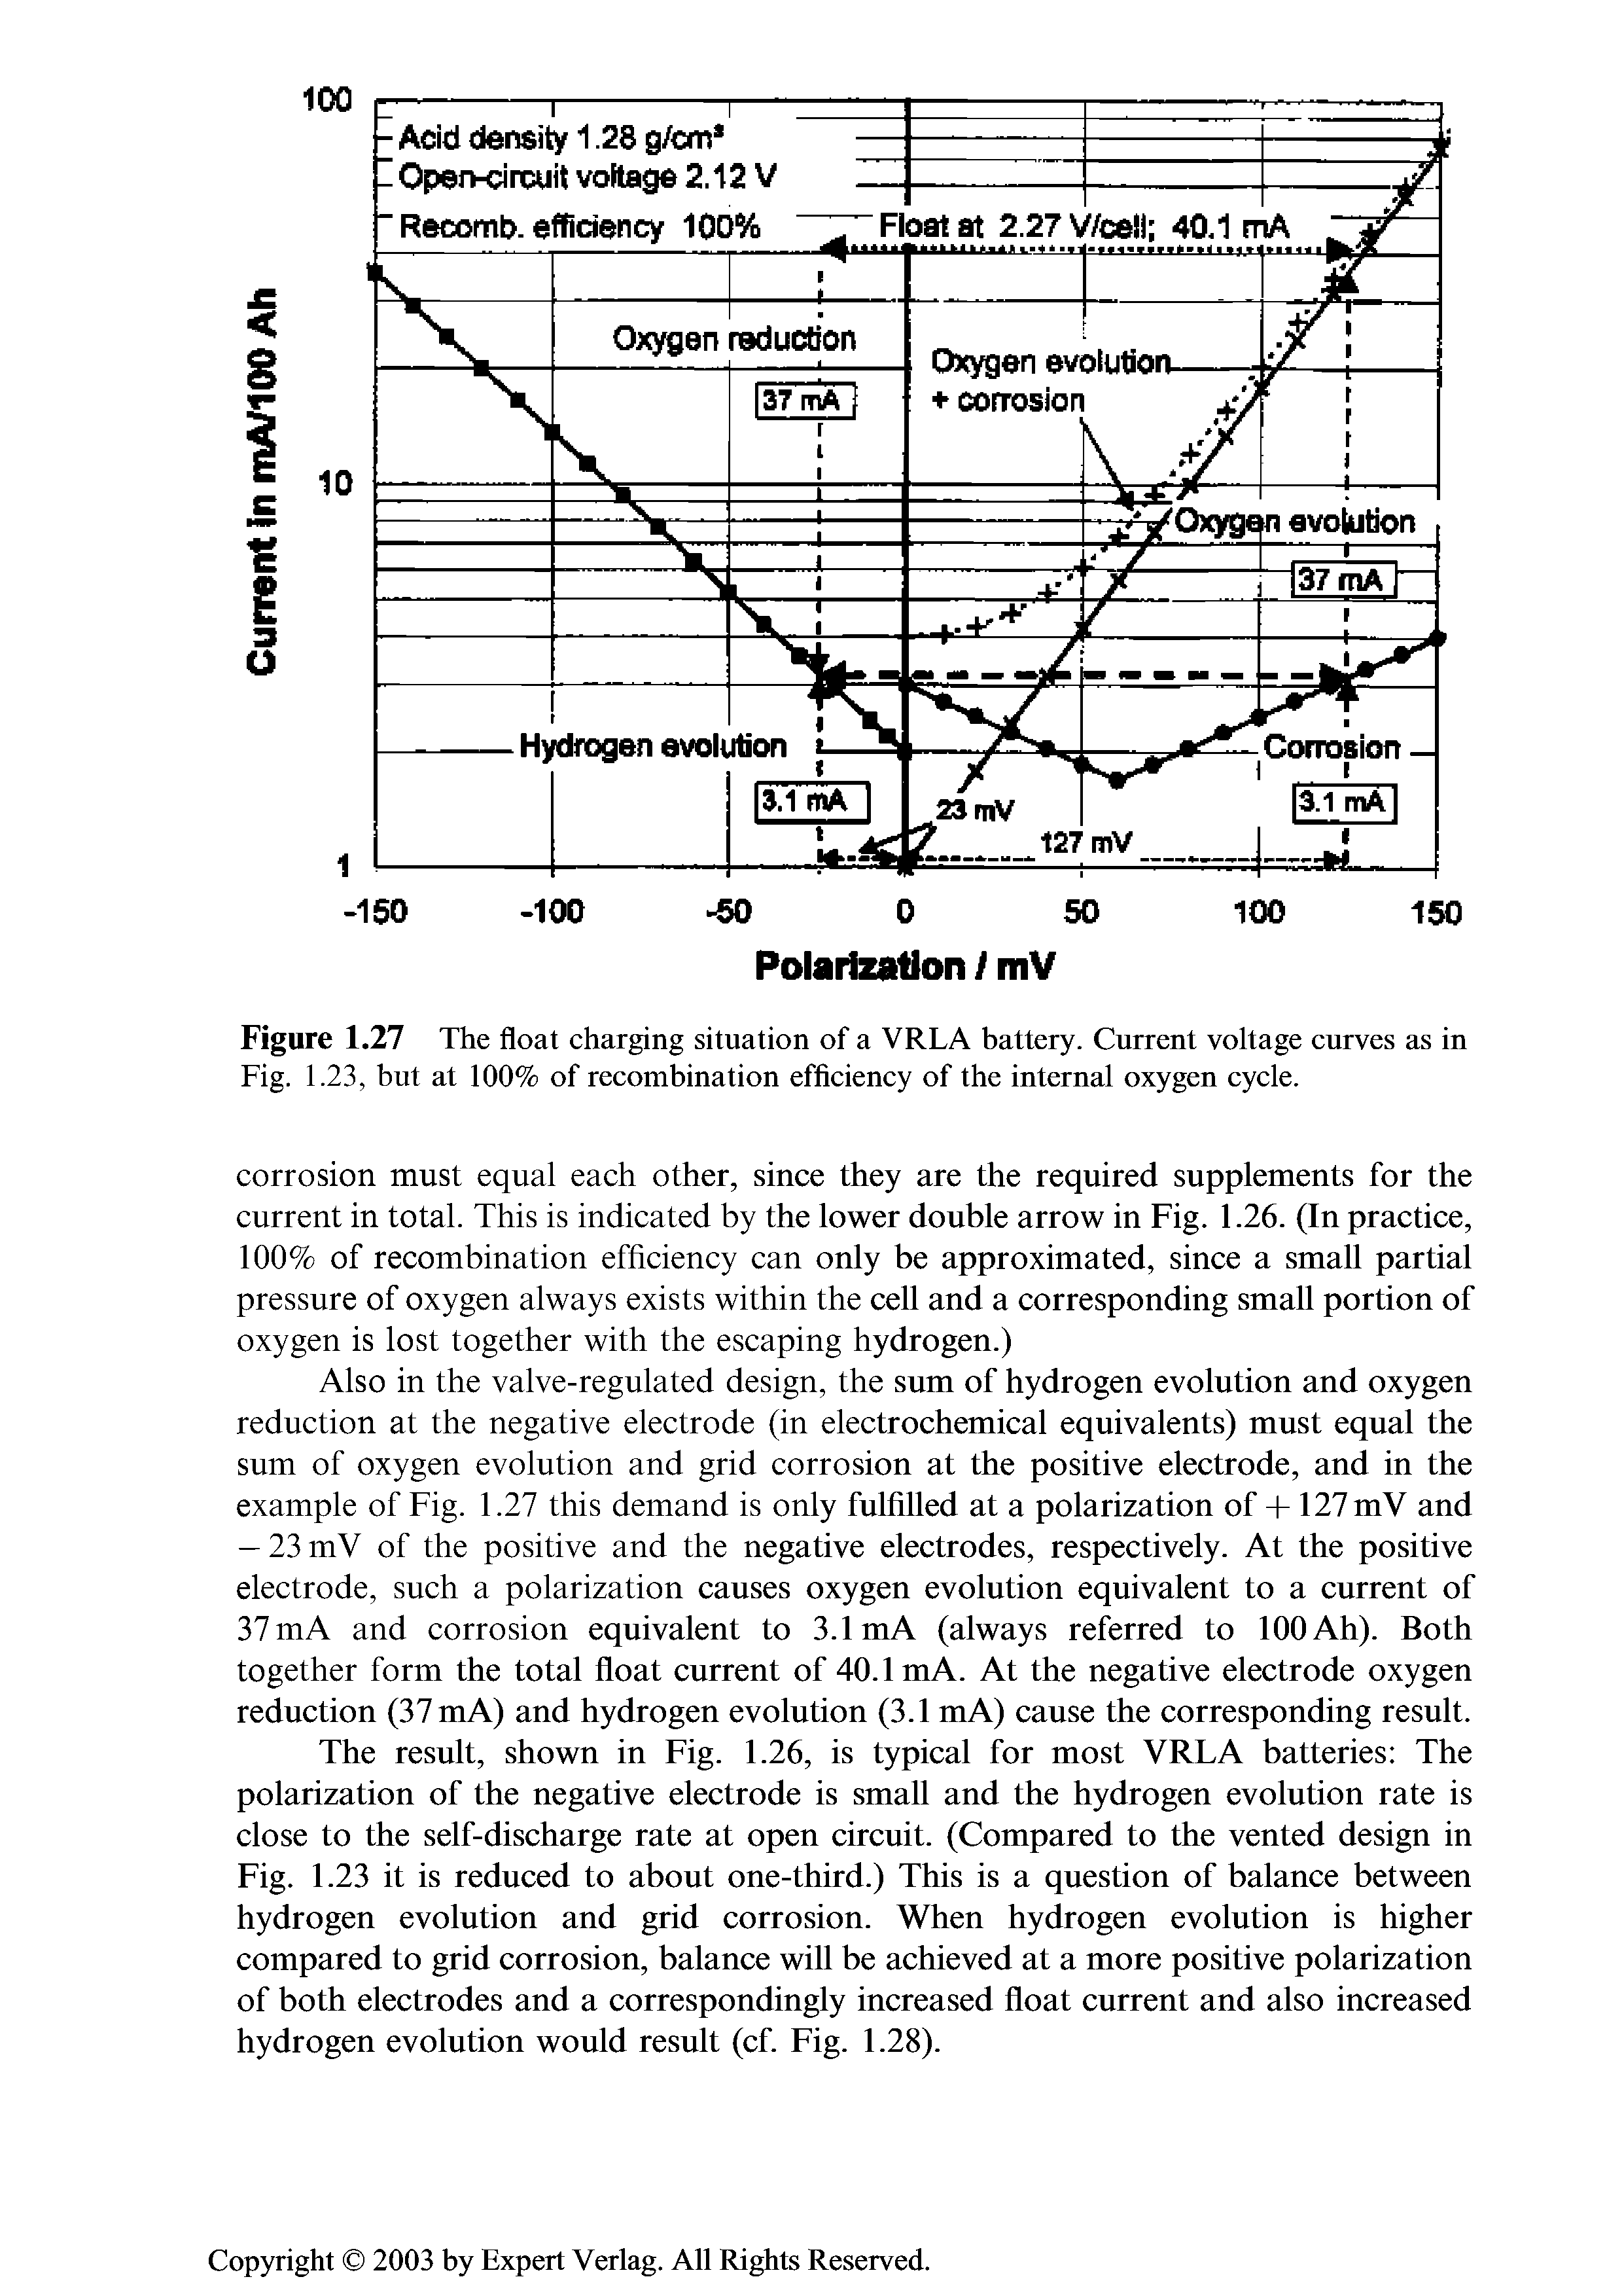 Figure 1.27 The float charging situation of a VRLA battery. Current voltage curves as in Fig. 1.23, but at 100% of recombination efficiency of the internal oxygen cycle.